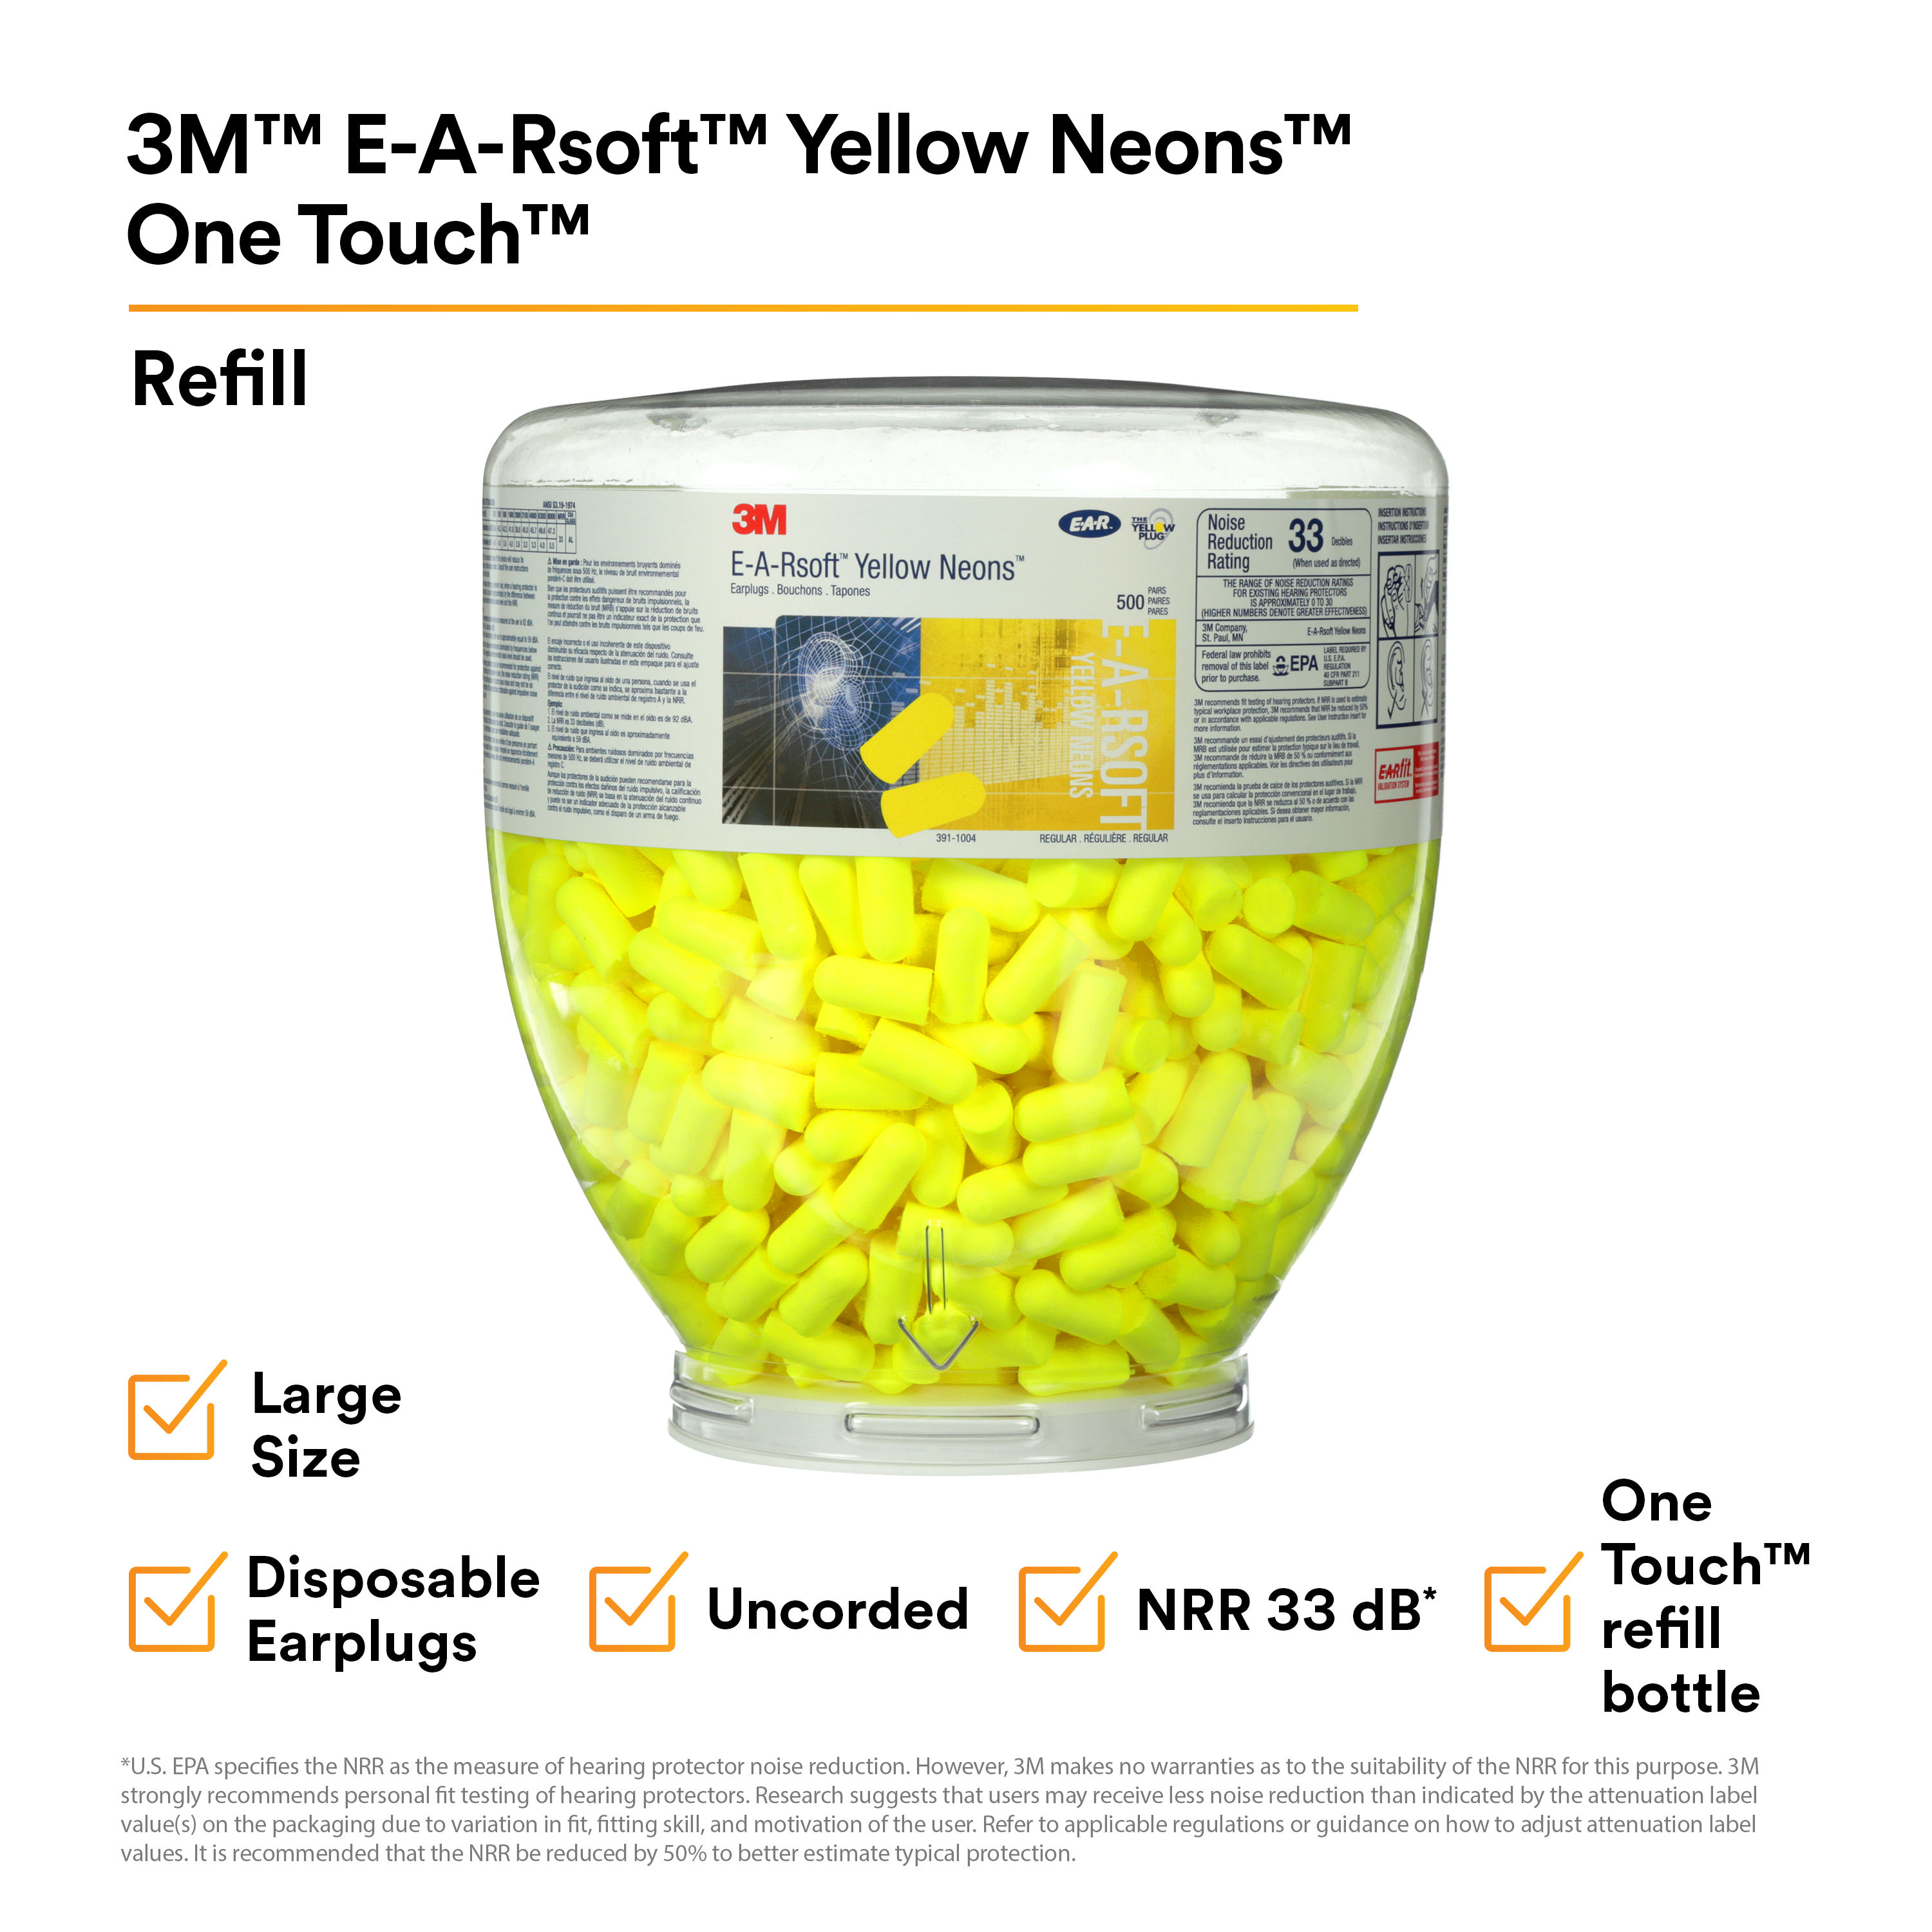 3M™ E-A-Rsoft™ Yellow Neons™ Earplugs 391-1005, Uncorded, in One Touch™ Dispenser Refill Bottle, Large Size, 1600 Pair/Case